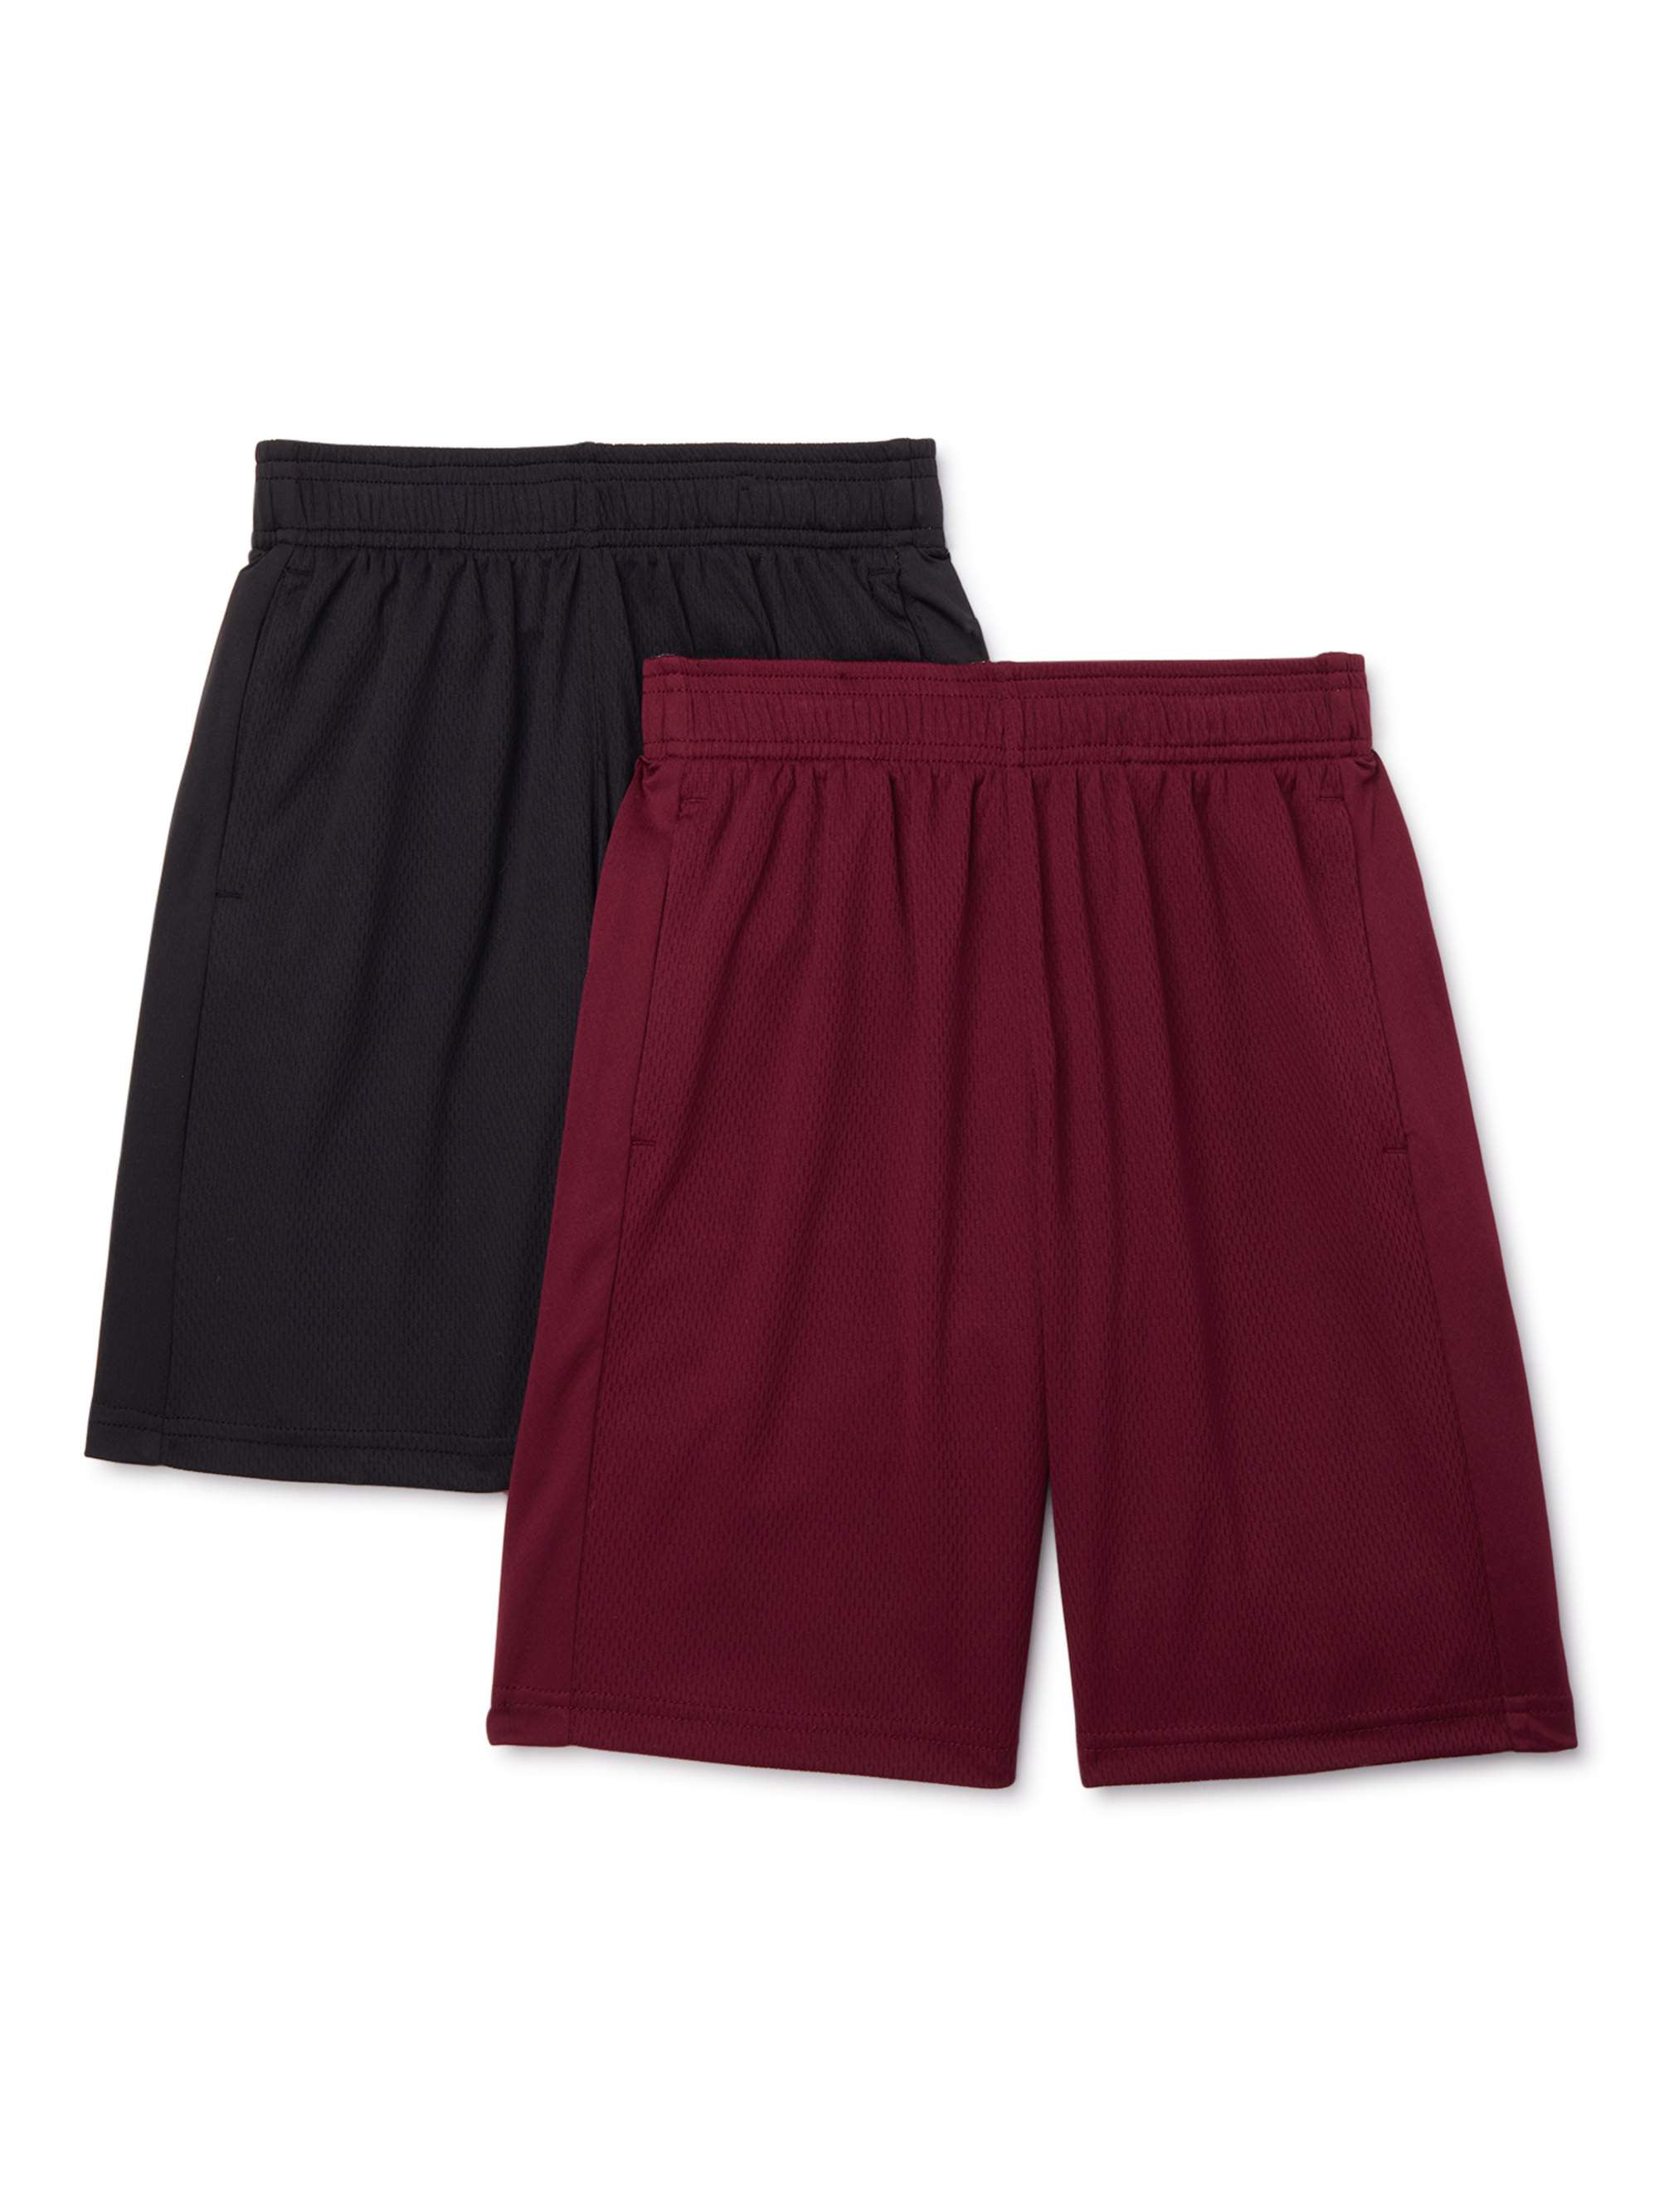 Athletic Works - Athletic Works Boys Core DriWorks 2-Pack Shorts, Sizes 4-18 & Husky - Walmart 